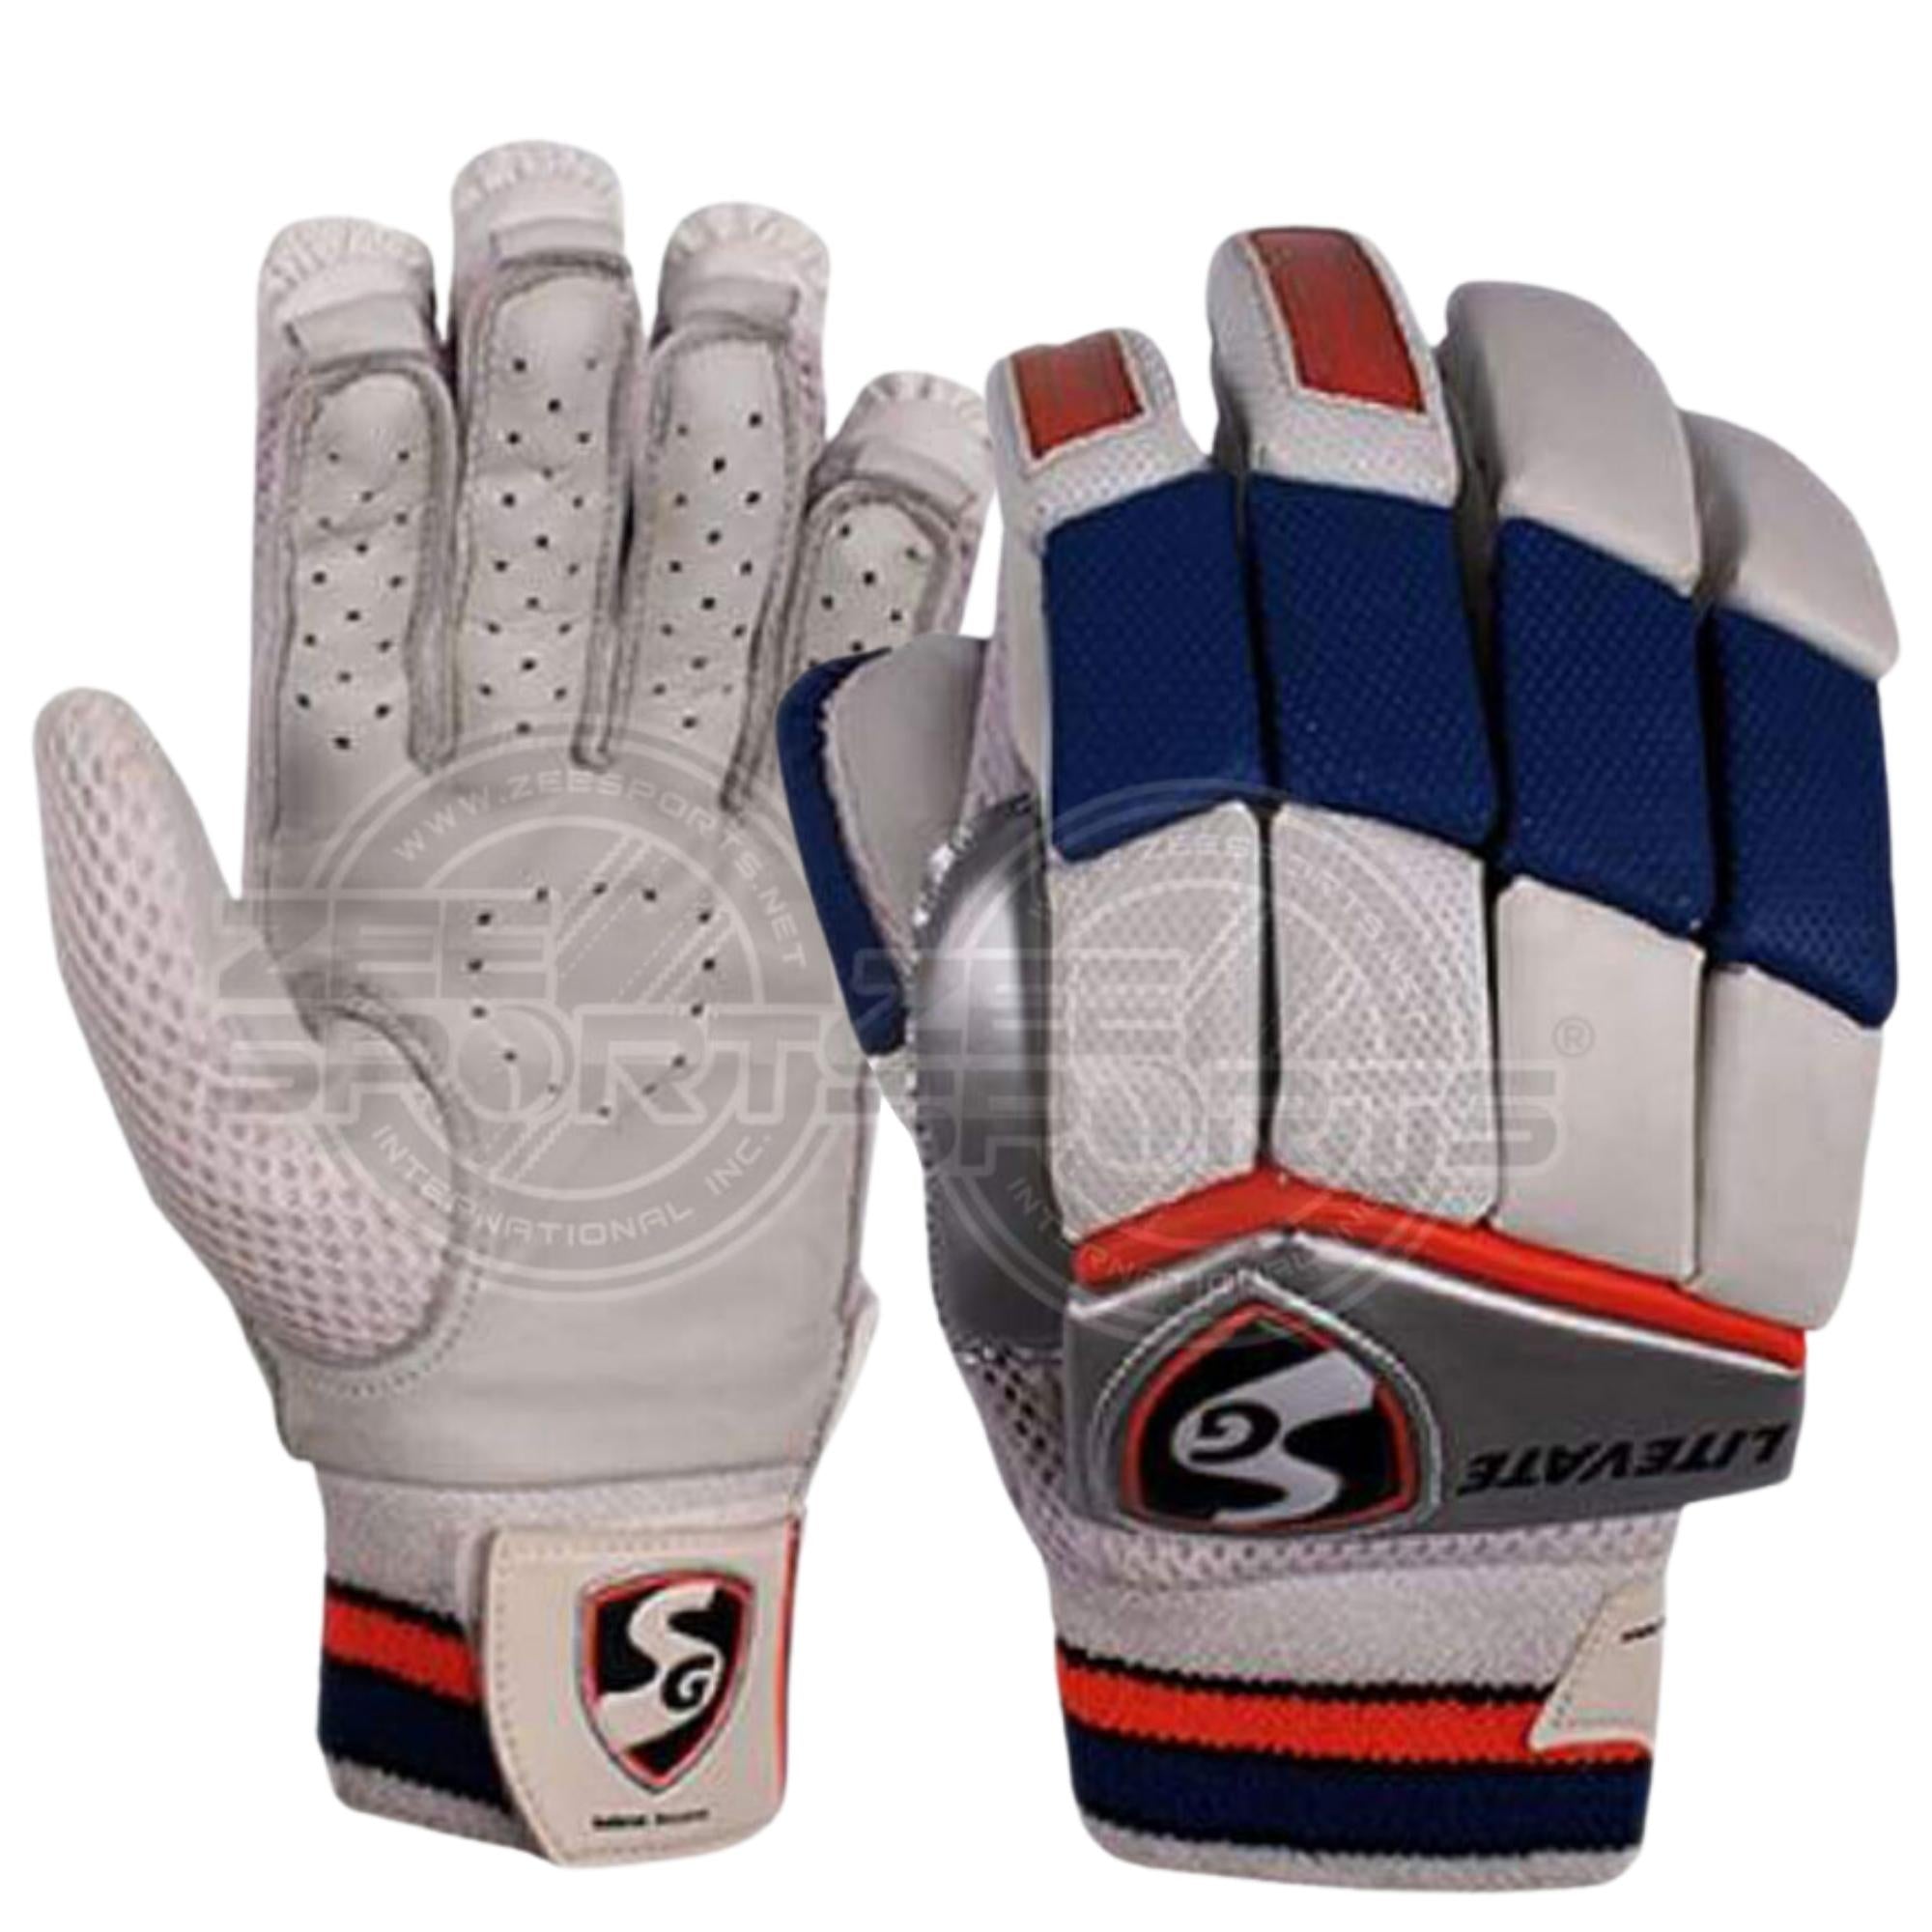 SG Litevate Cricket Batting Gloves Mens Size Right And Left Handed(Color May Vary)